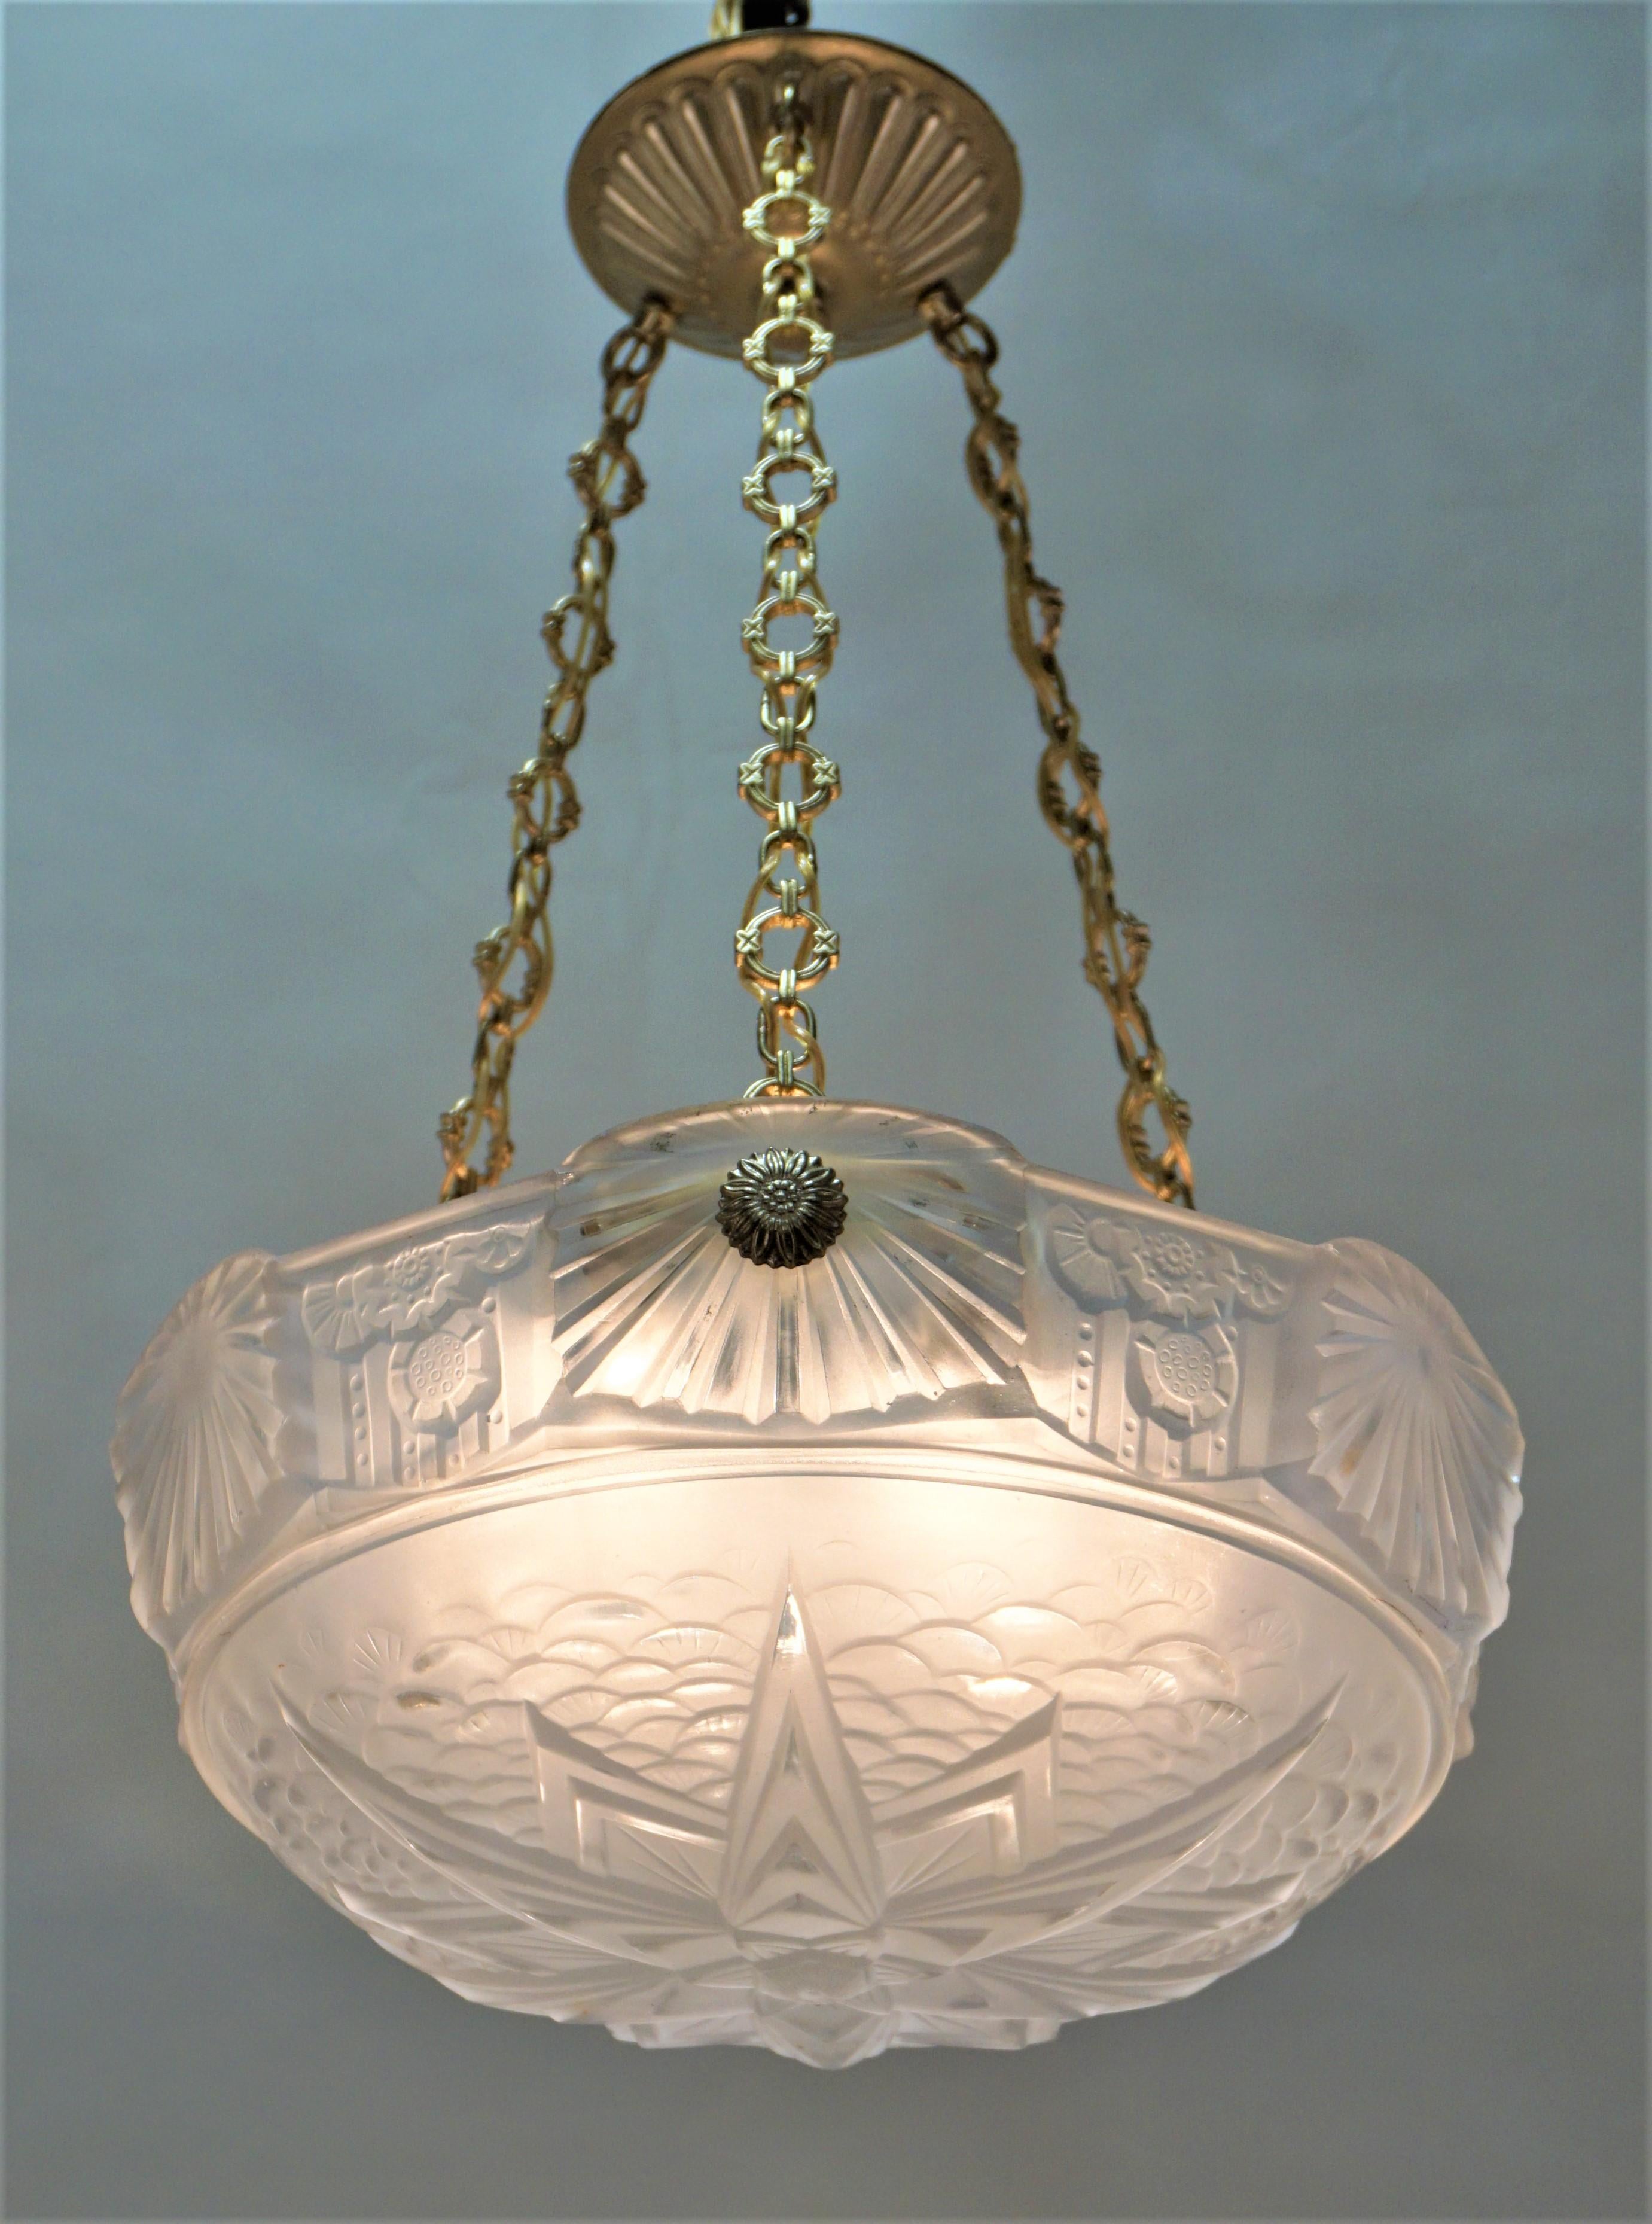 Set of three highly stylized with geometric pattern Art Deco pendant / chandeliers in clear frost by Muller Freres with bronze hardware.
Total of six lights 60 watt each.
Height can be adjusted by removing some of the chain.